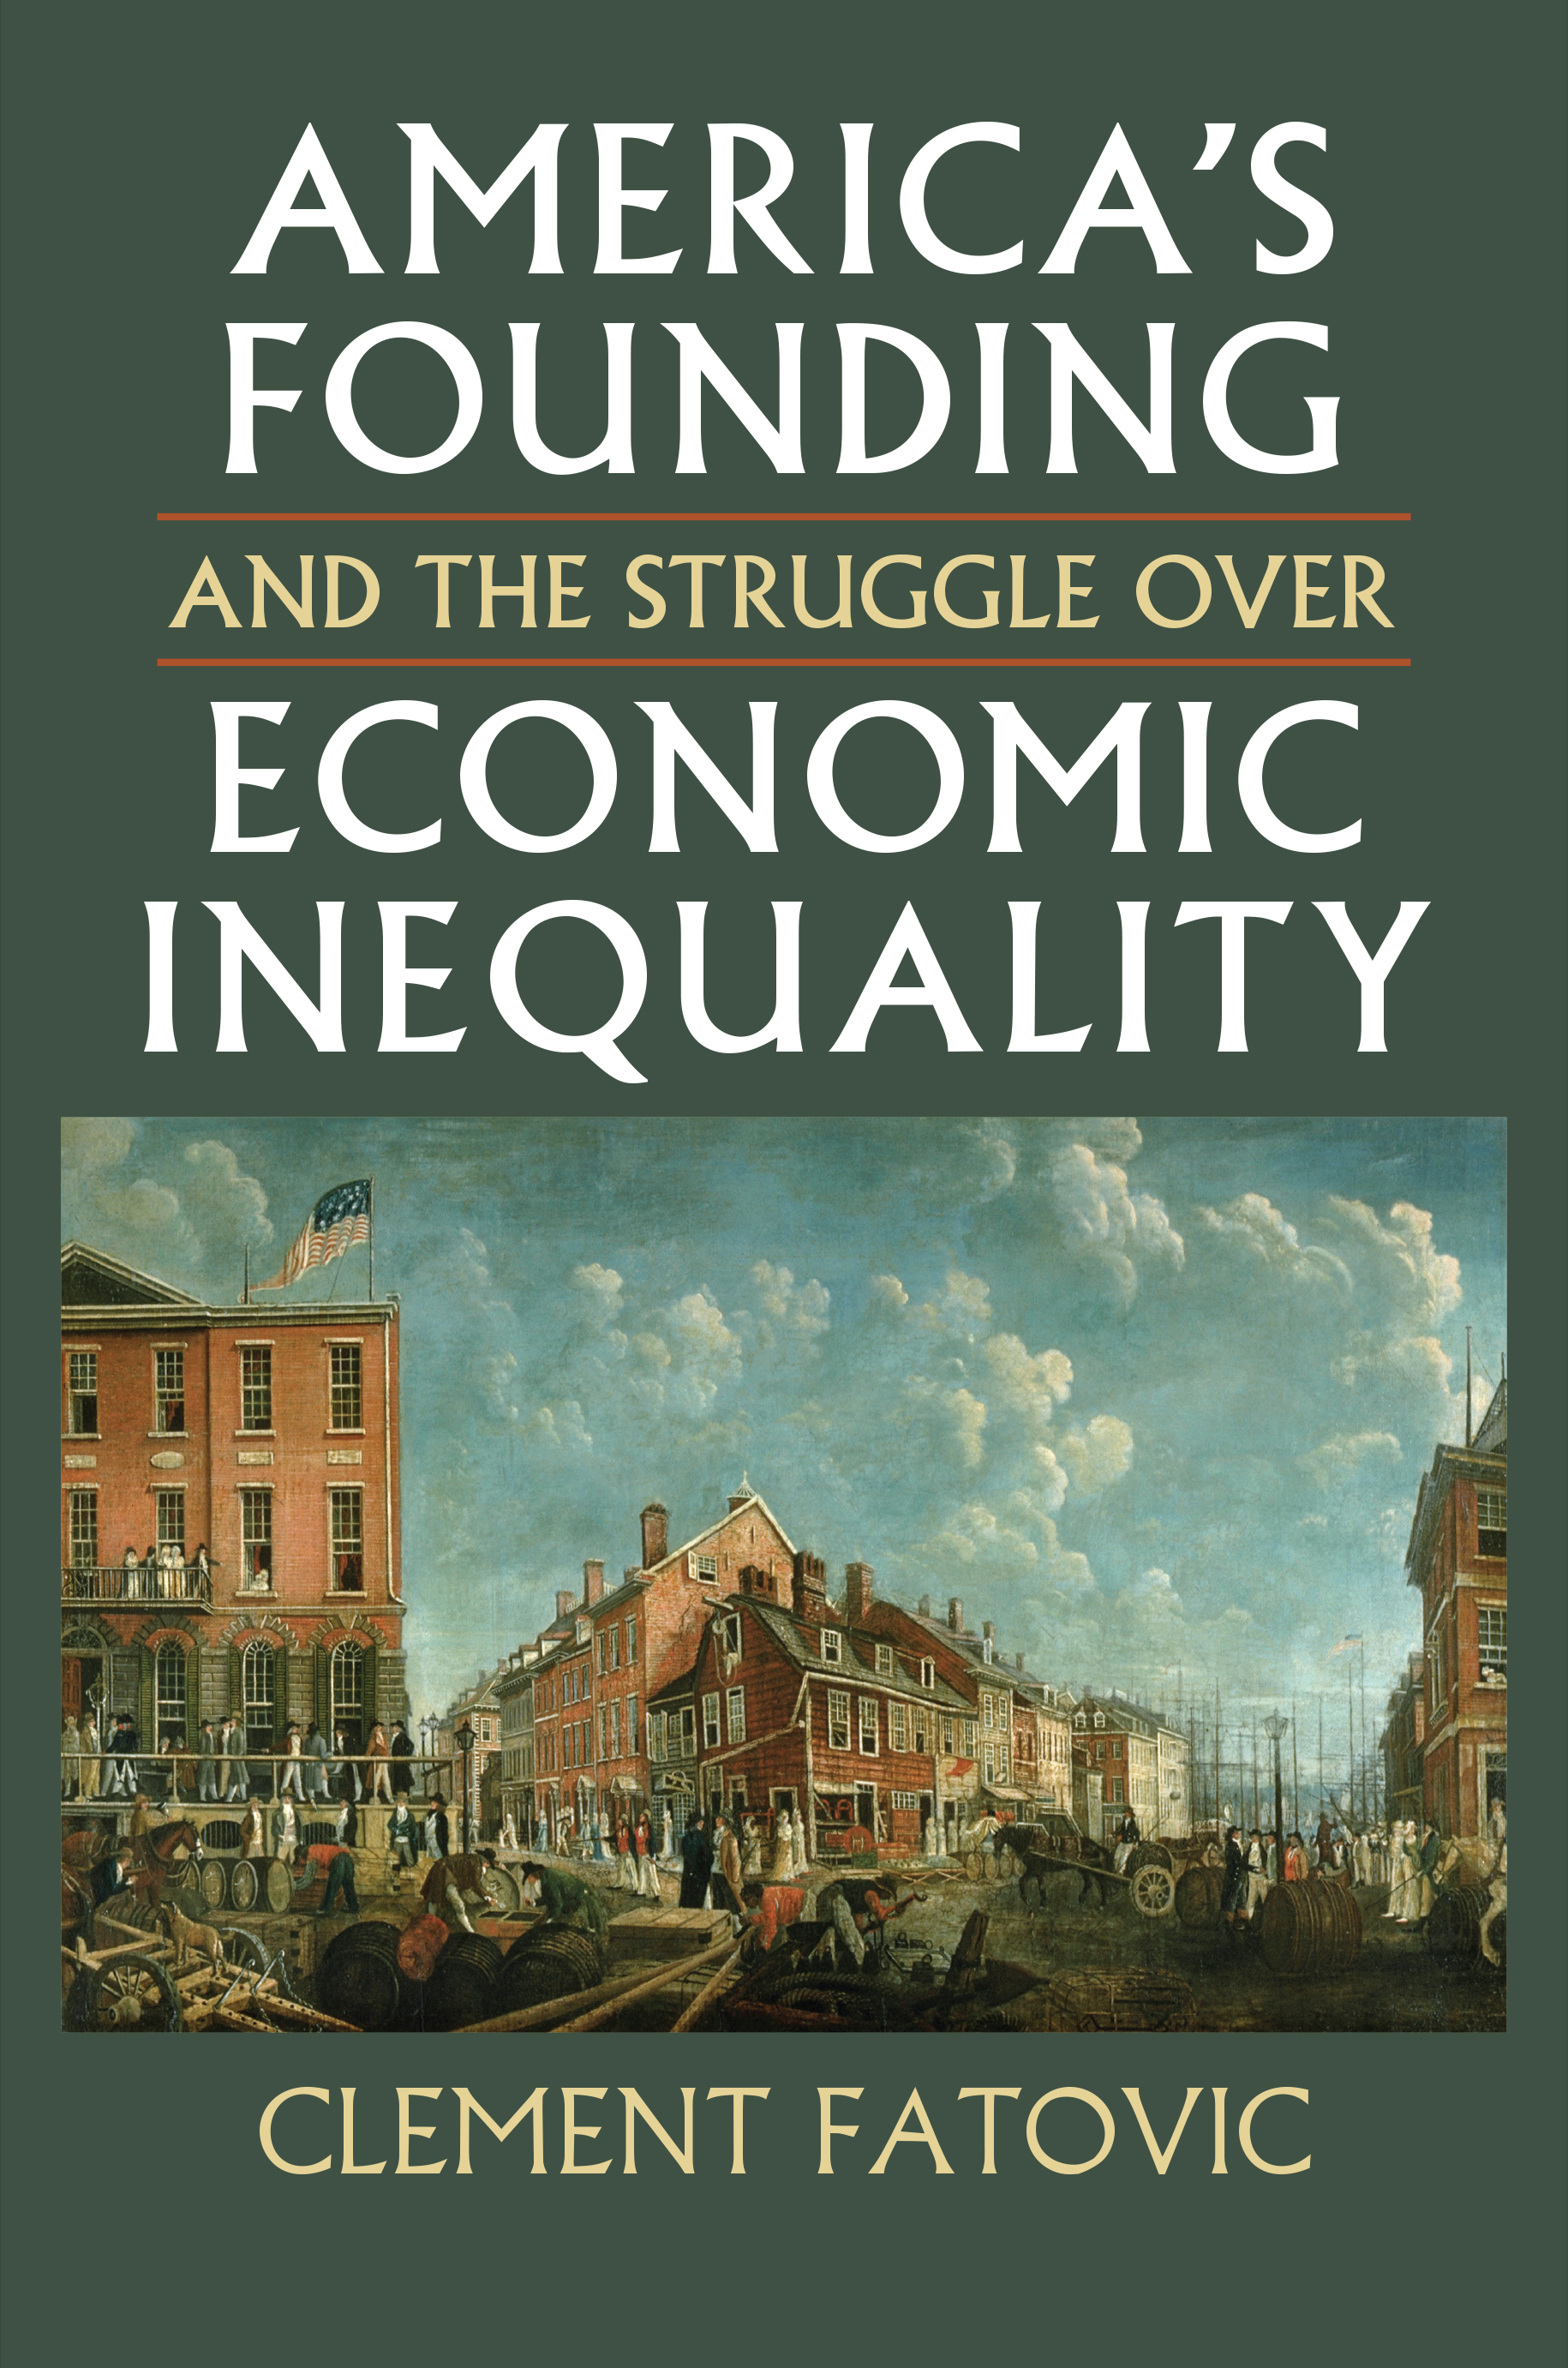 America's founding and the struggle over economic inequality cover image